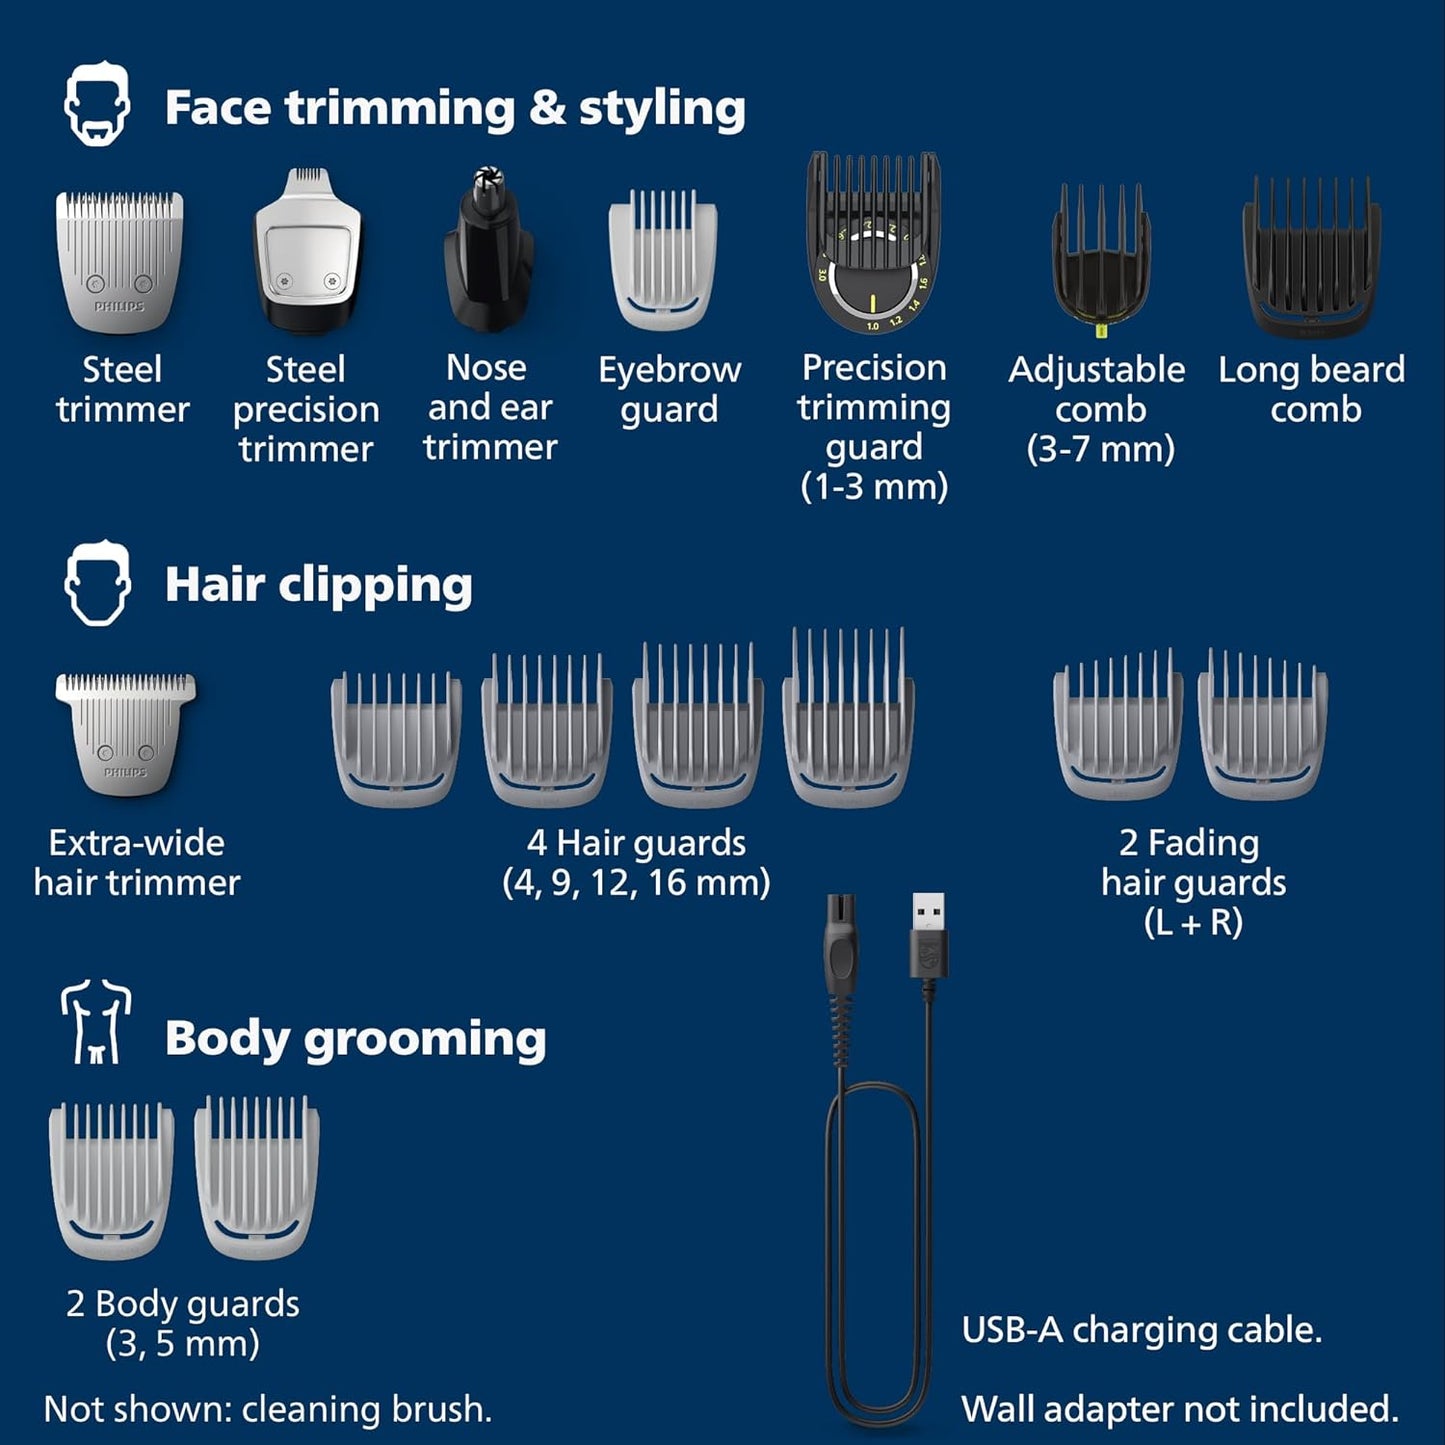 Philips Norelco Multigroom Series 7000, Mens Grooming Kit with Trimmer for Beard, Head, Hair, Body, Groin, and Face - NO Blade Oil Needed, MG7910\/49